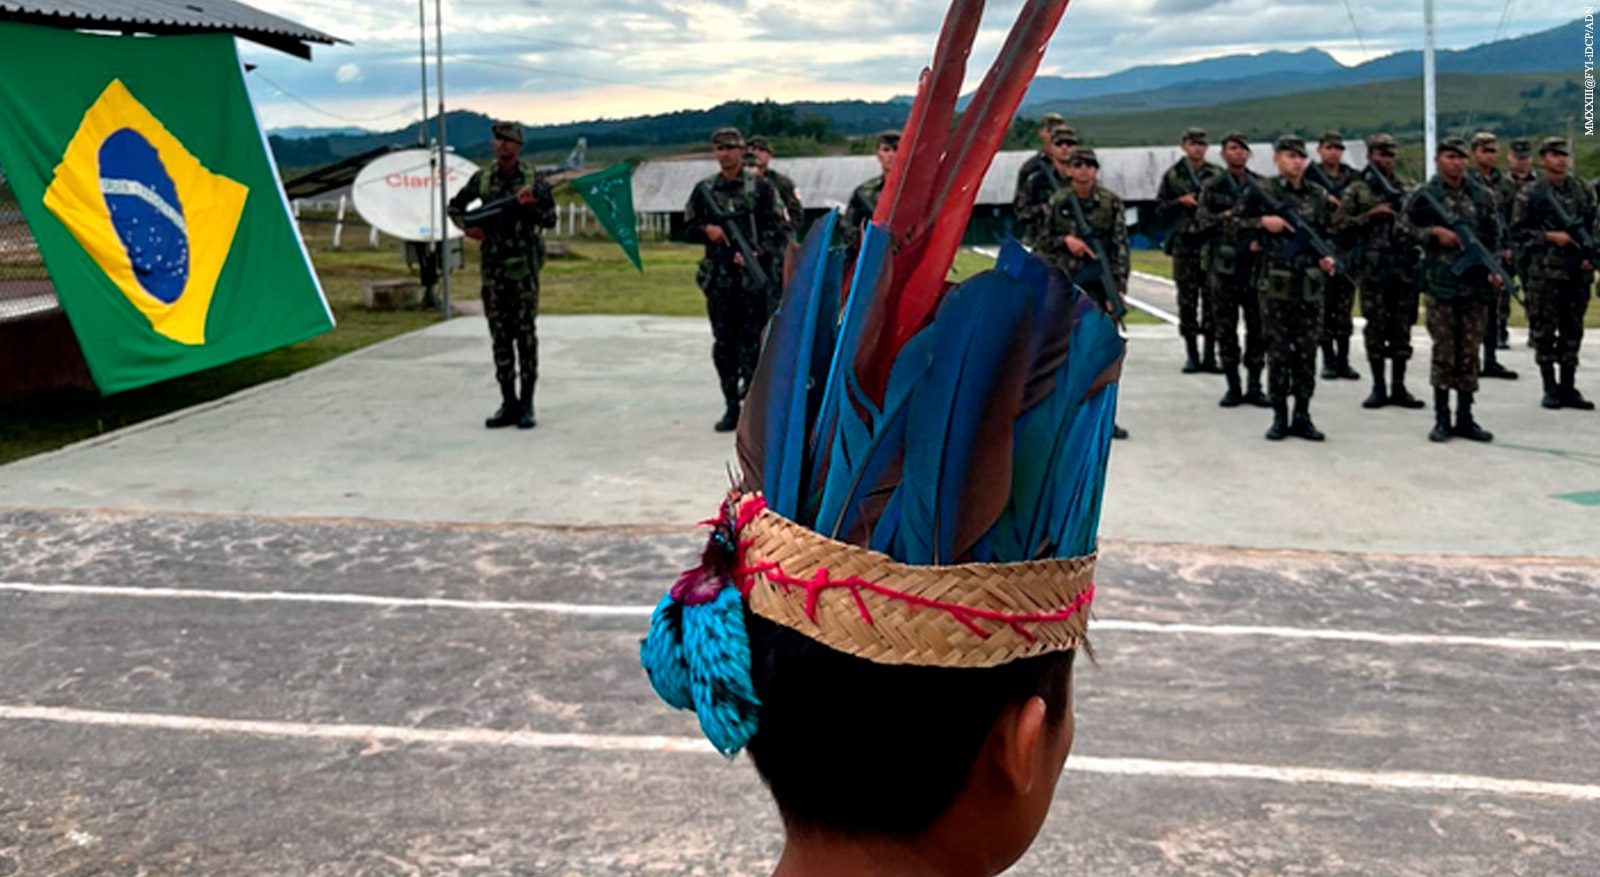 Present in Yanomami territory for more than 35 years, the Brazilian Army continues to support indigenous people